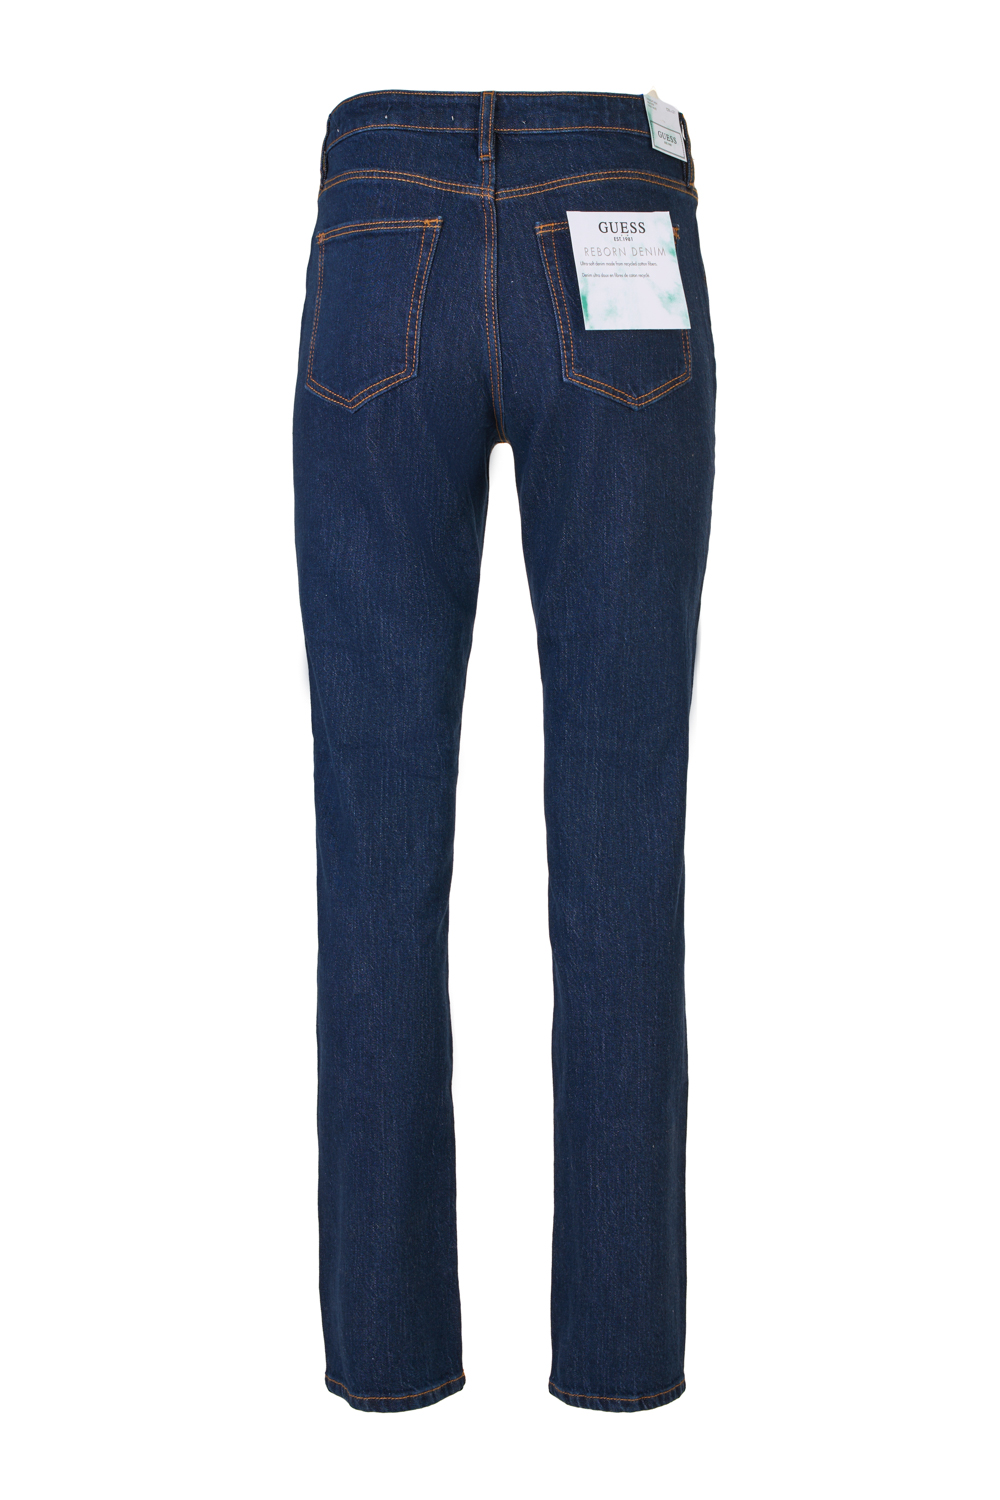 Straight High-Rise Soft Jeans (Guess)